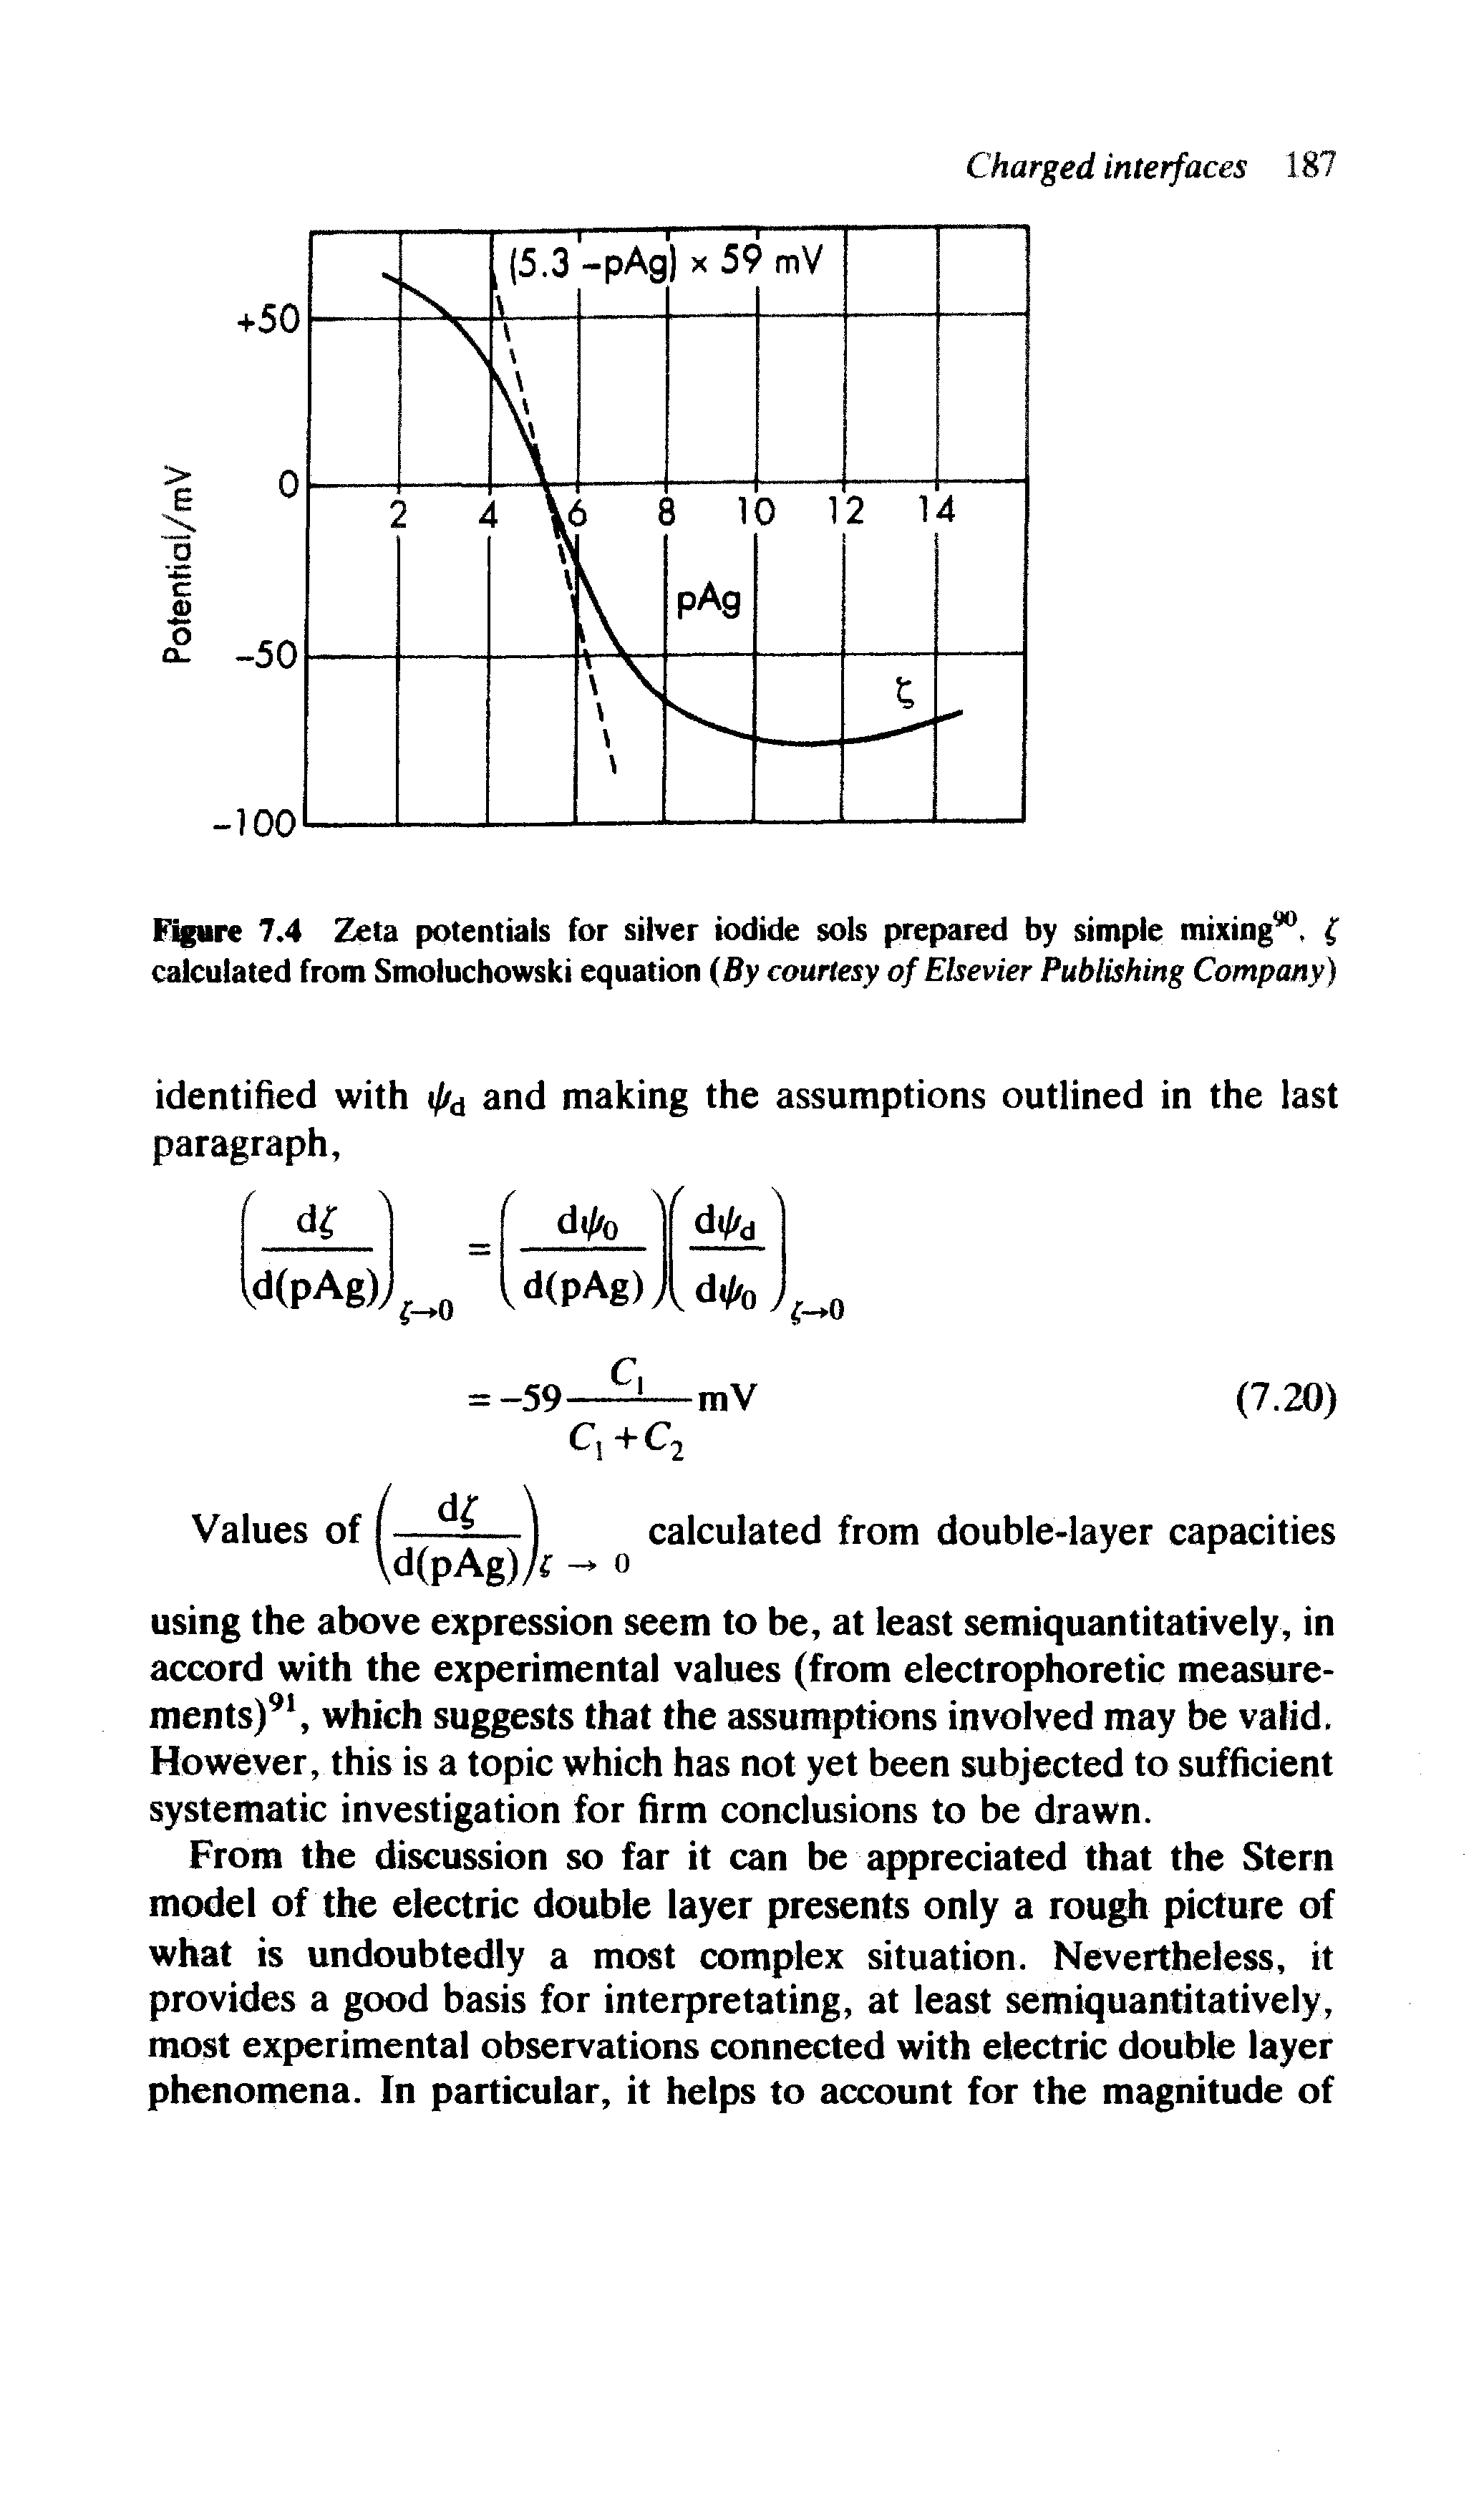 Figure 7.4 Zeta potentials for silver iodide sols prepared by simple mixing90, ( calculated from Smoiuchowski equation (By courtesy of Elsevier Publishing Company)...